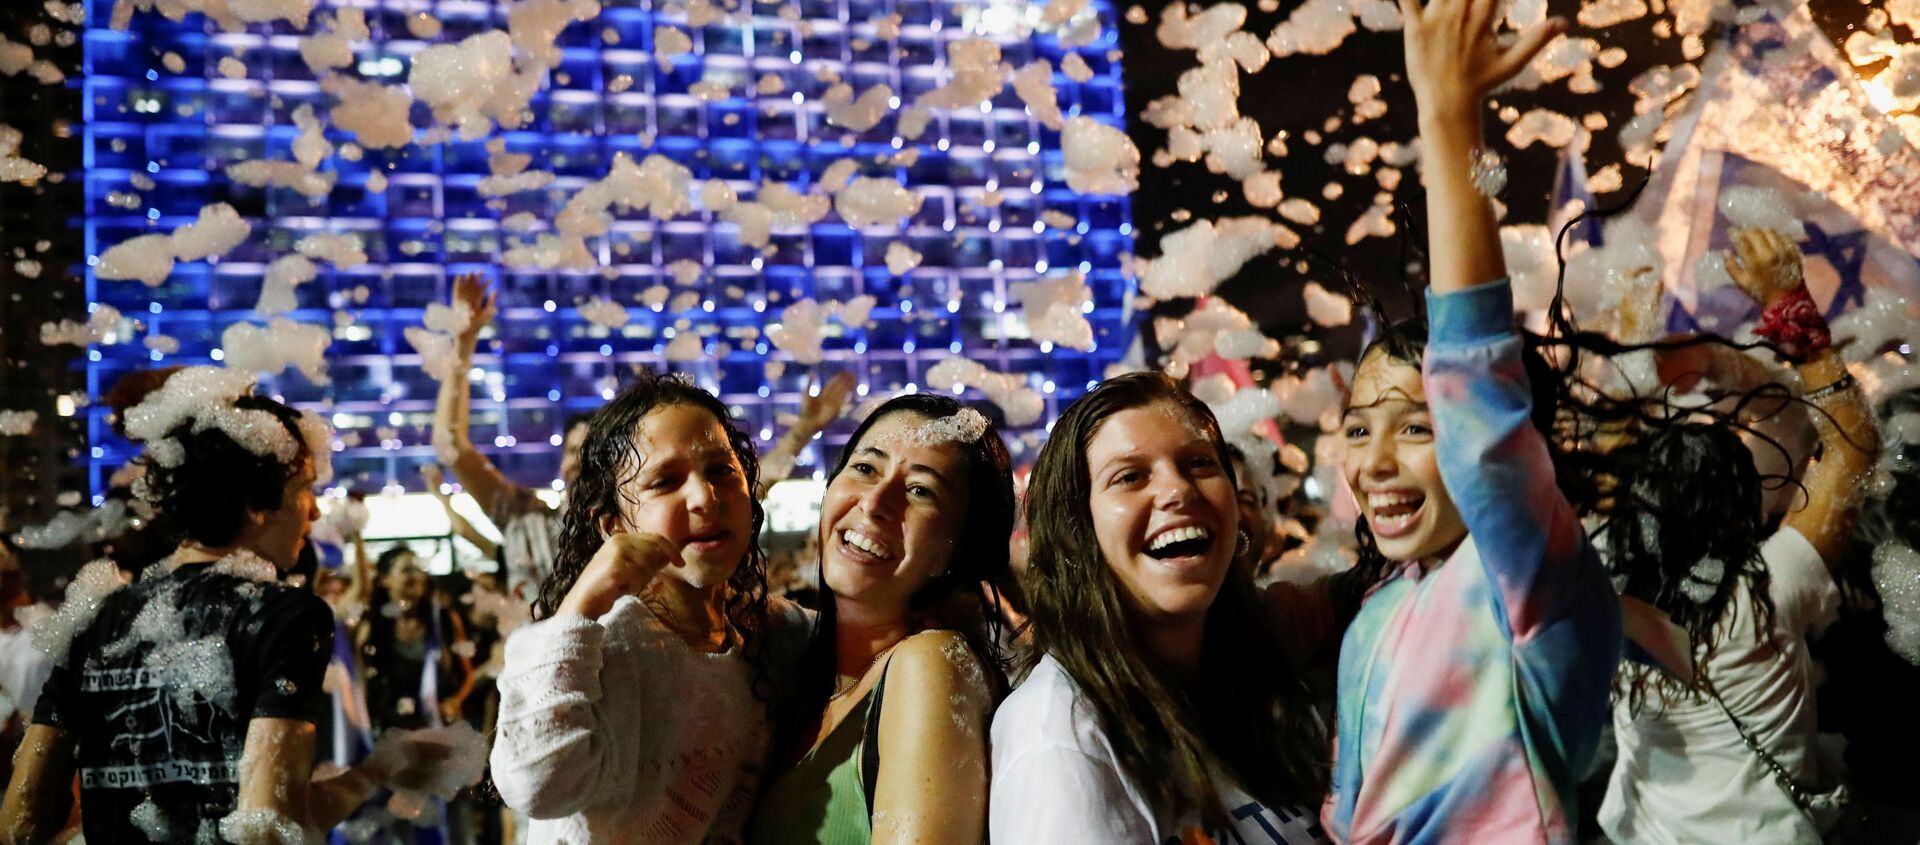 People celebrate after Israel's parliament voted in a new coalition government, ending Benjamin Netanyahu's 12-year hold on power, at Rabin Square in Tel Aviv, Israel June 13, 2021. - Sputnik International, 1920, 13.06.2021